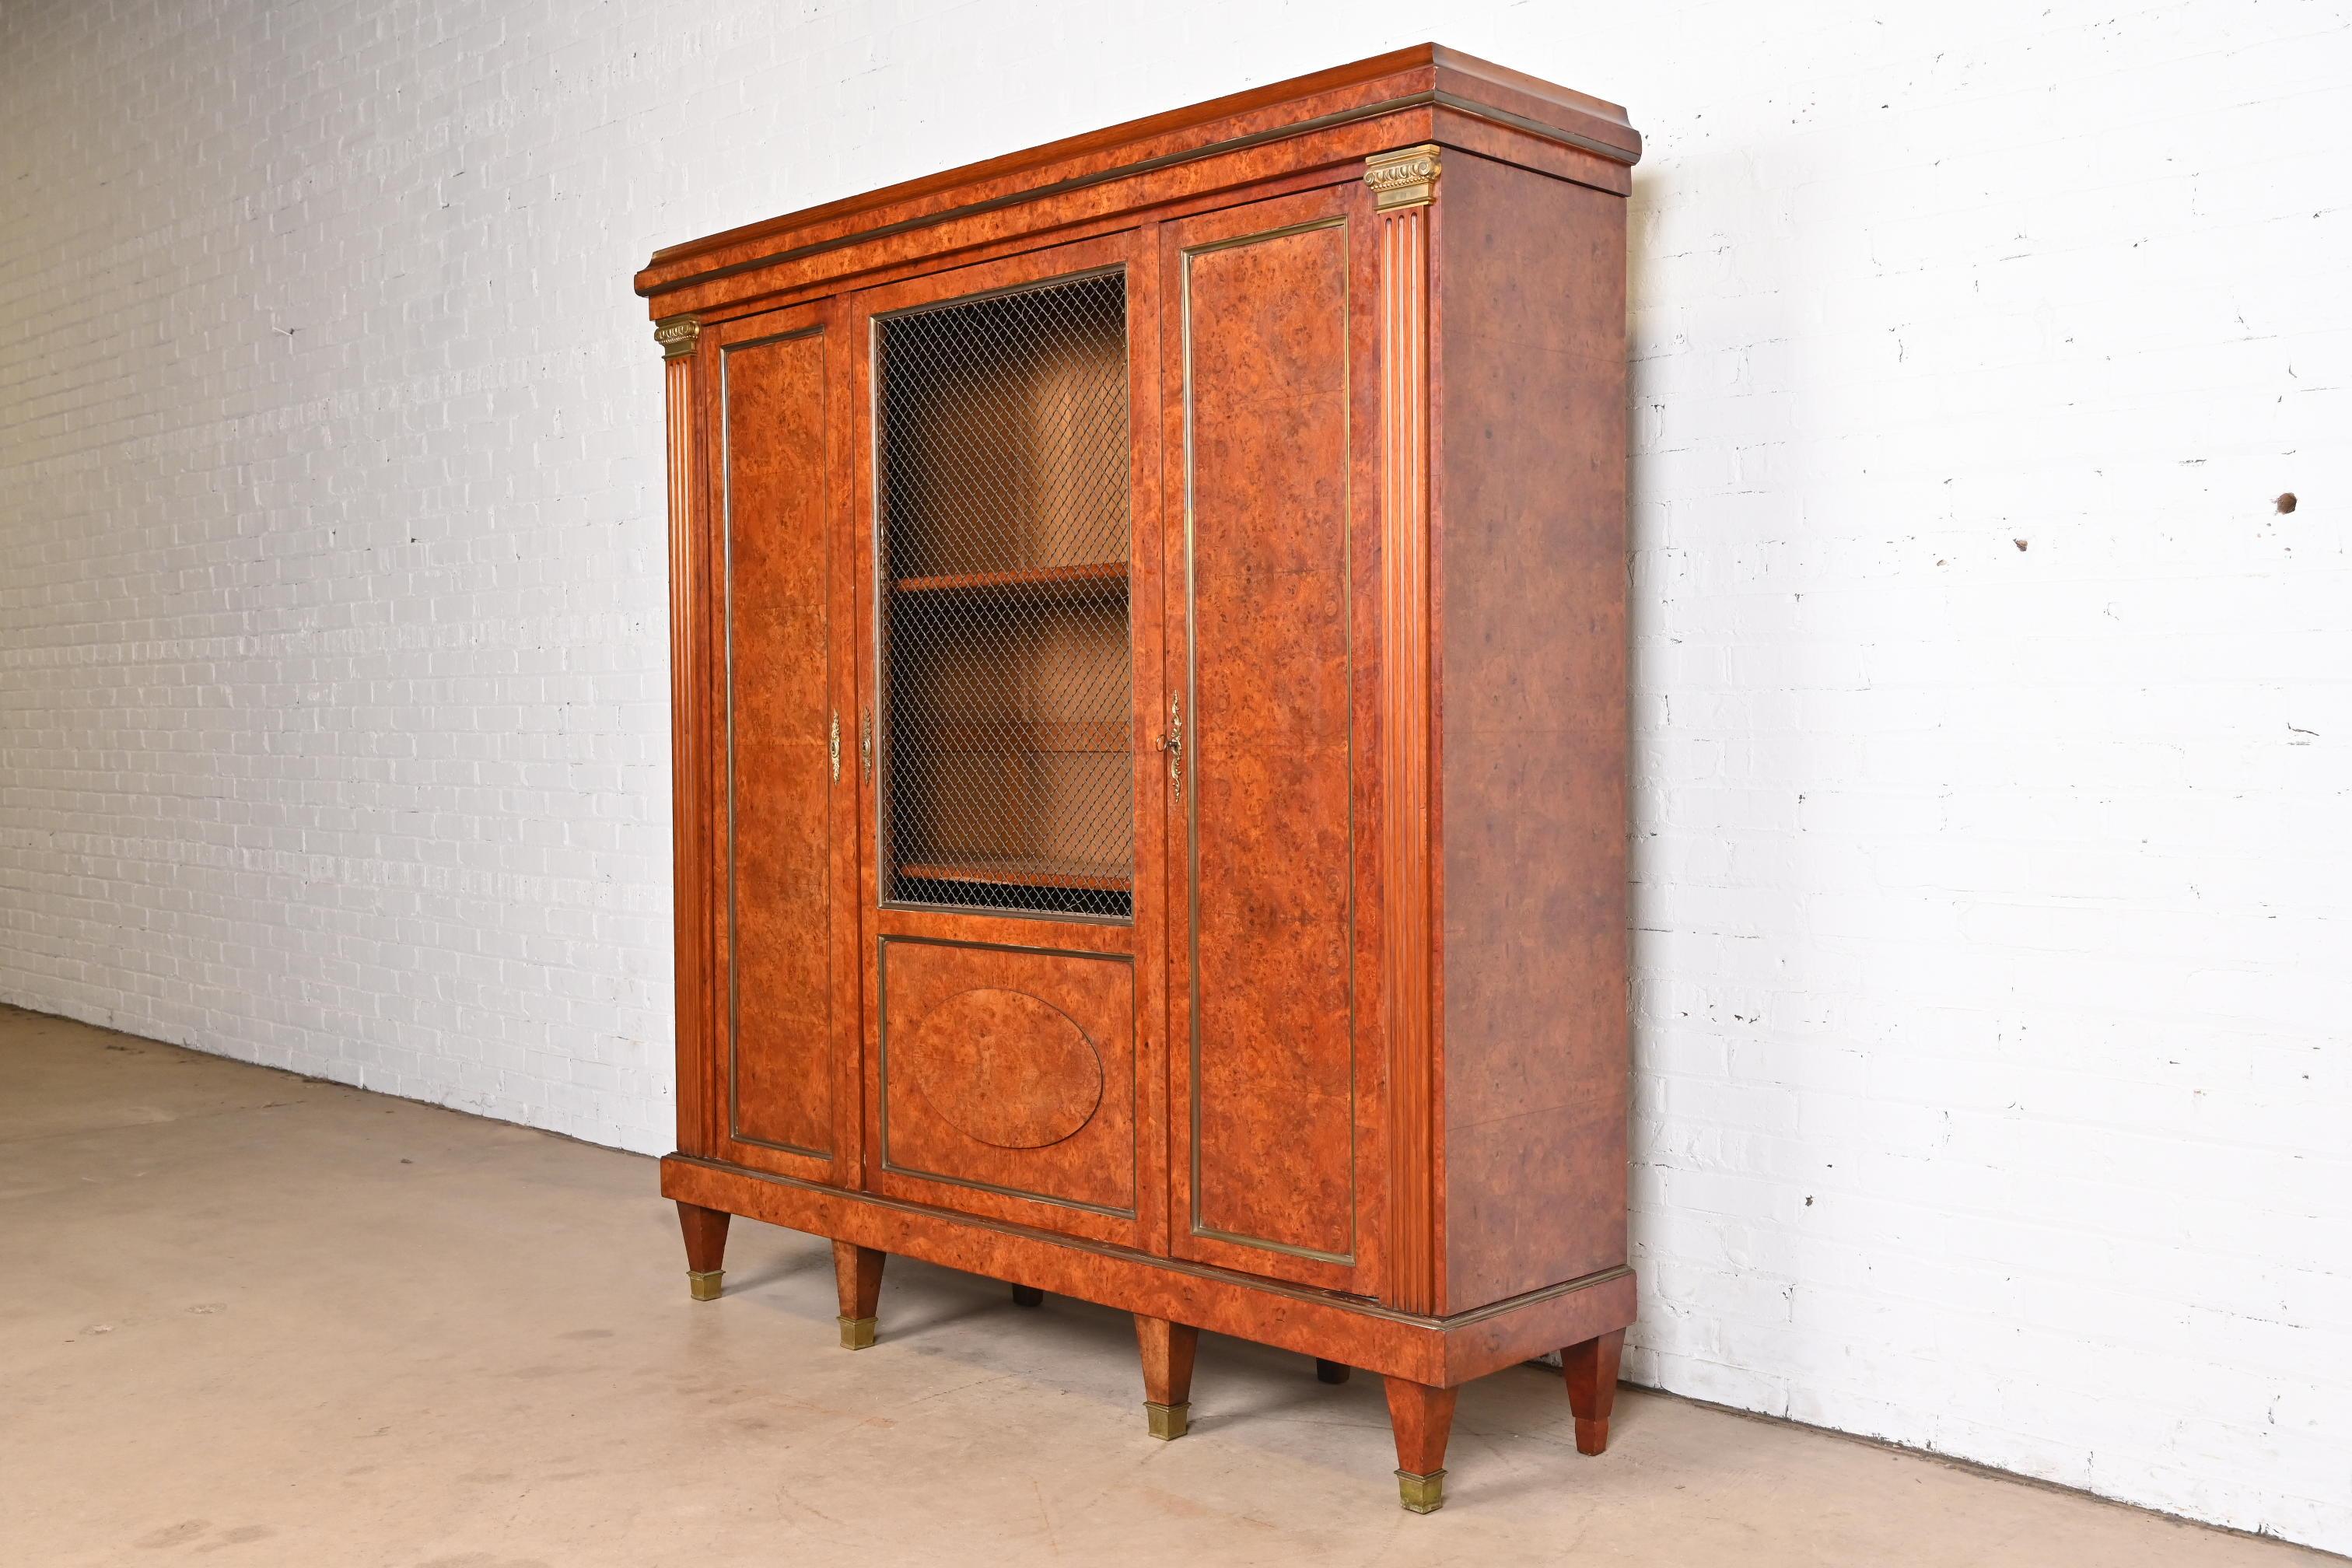 A beautiful antique French Empire knockdown bibliotheque bookcase cabinet

In the manner of Louis Majorelle

France, Circa 1880s

Gorgeous burl wood, with bronze mounts and trim.

Measures: 67.75